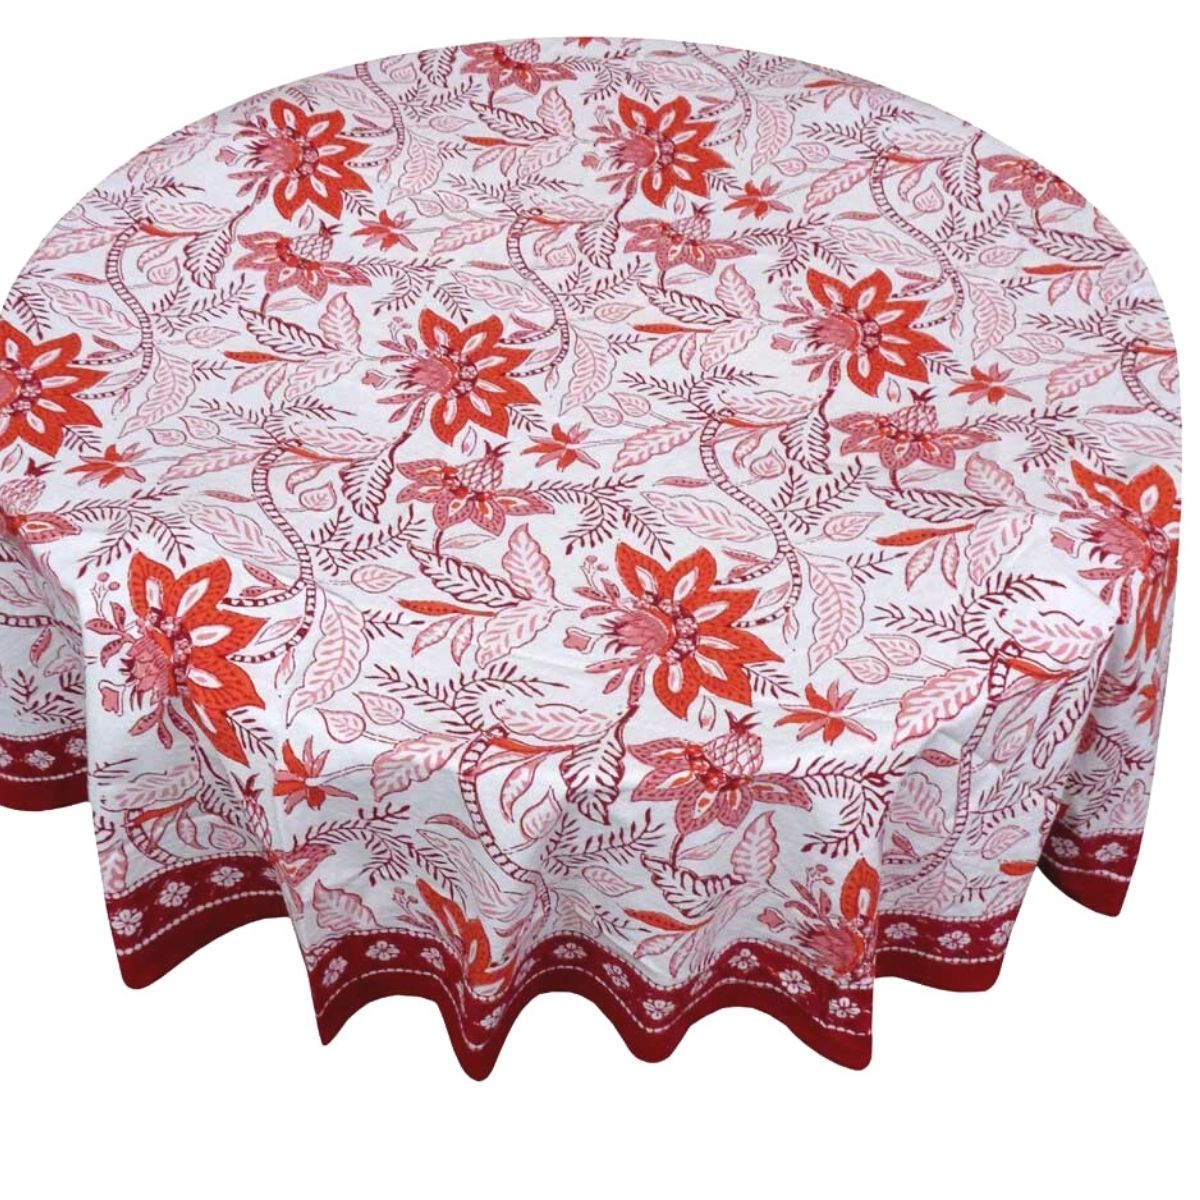 Charlotte red round tablecloth 220cm- 8 seater